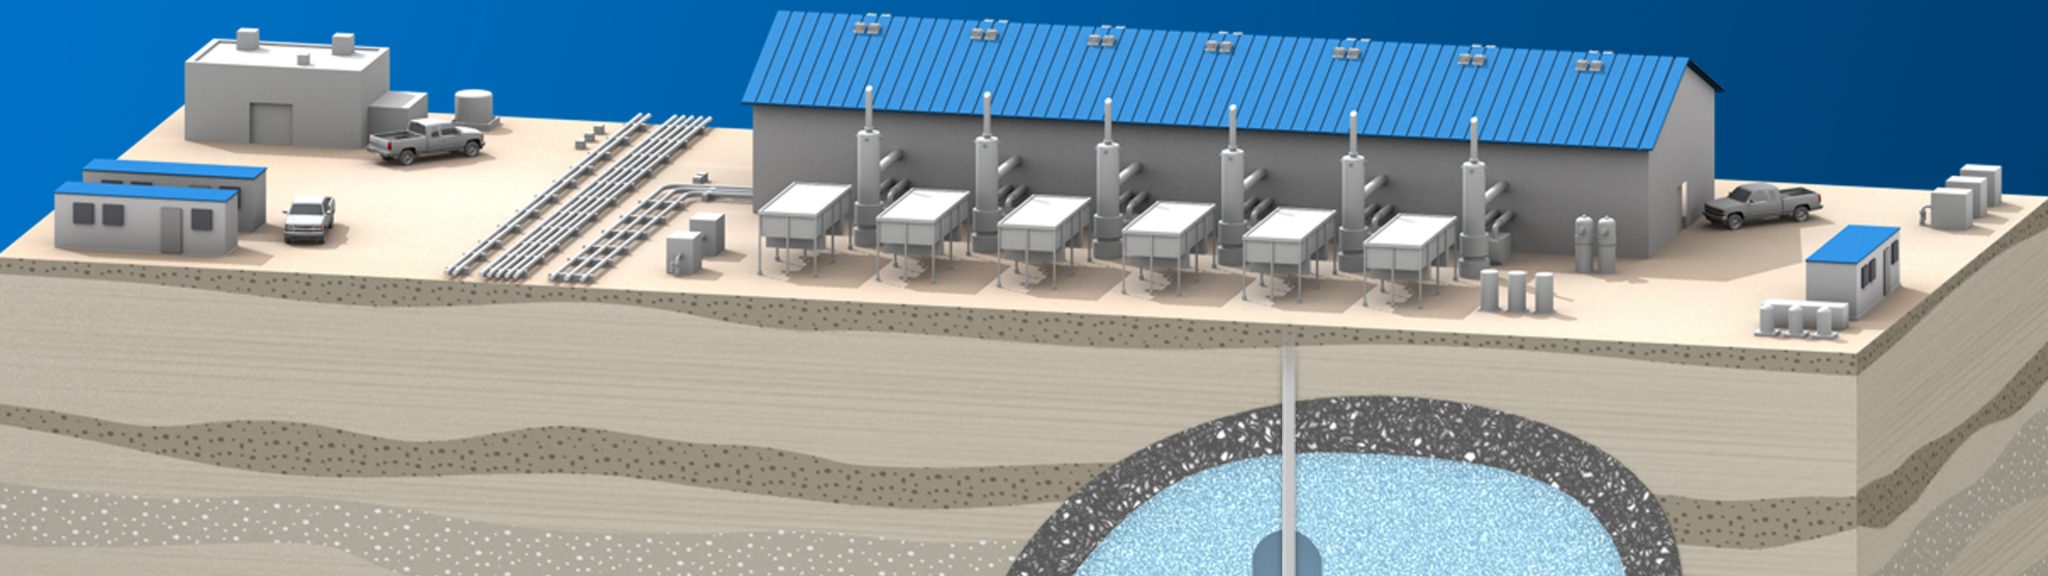 A rendering of a natural gas storing station, where the natural gas is pumped deep underground